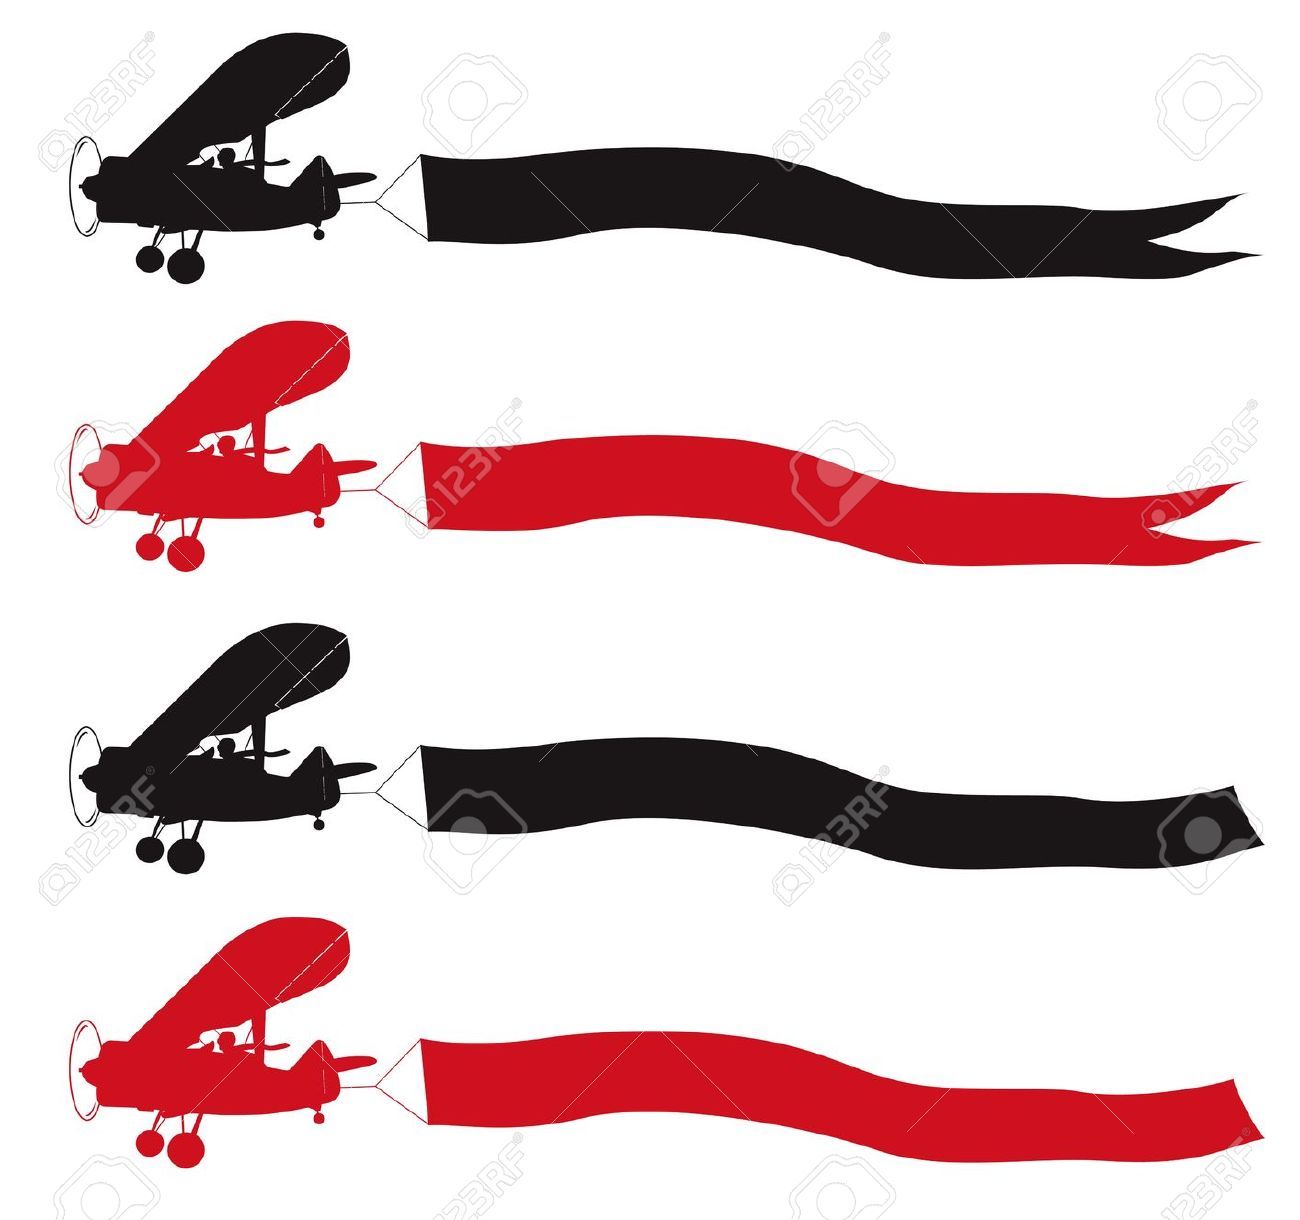 Google search shadow theater. Banner clipart silhouette